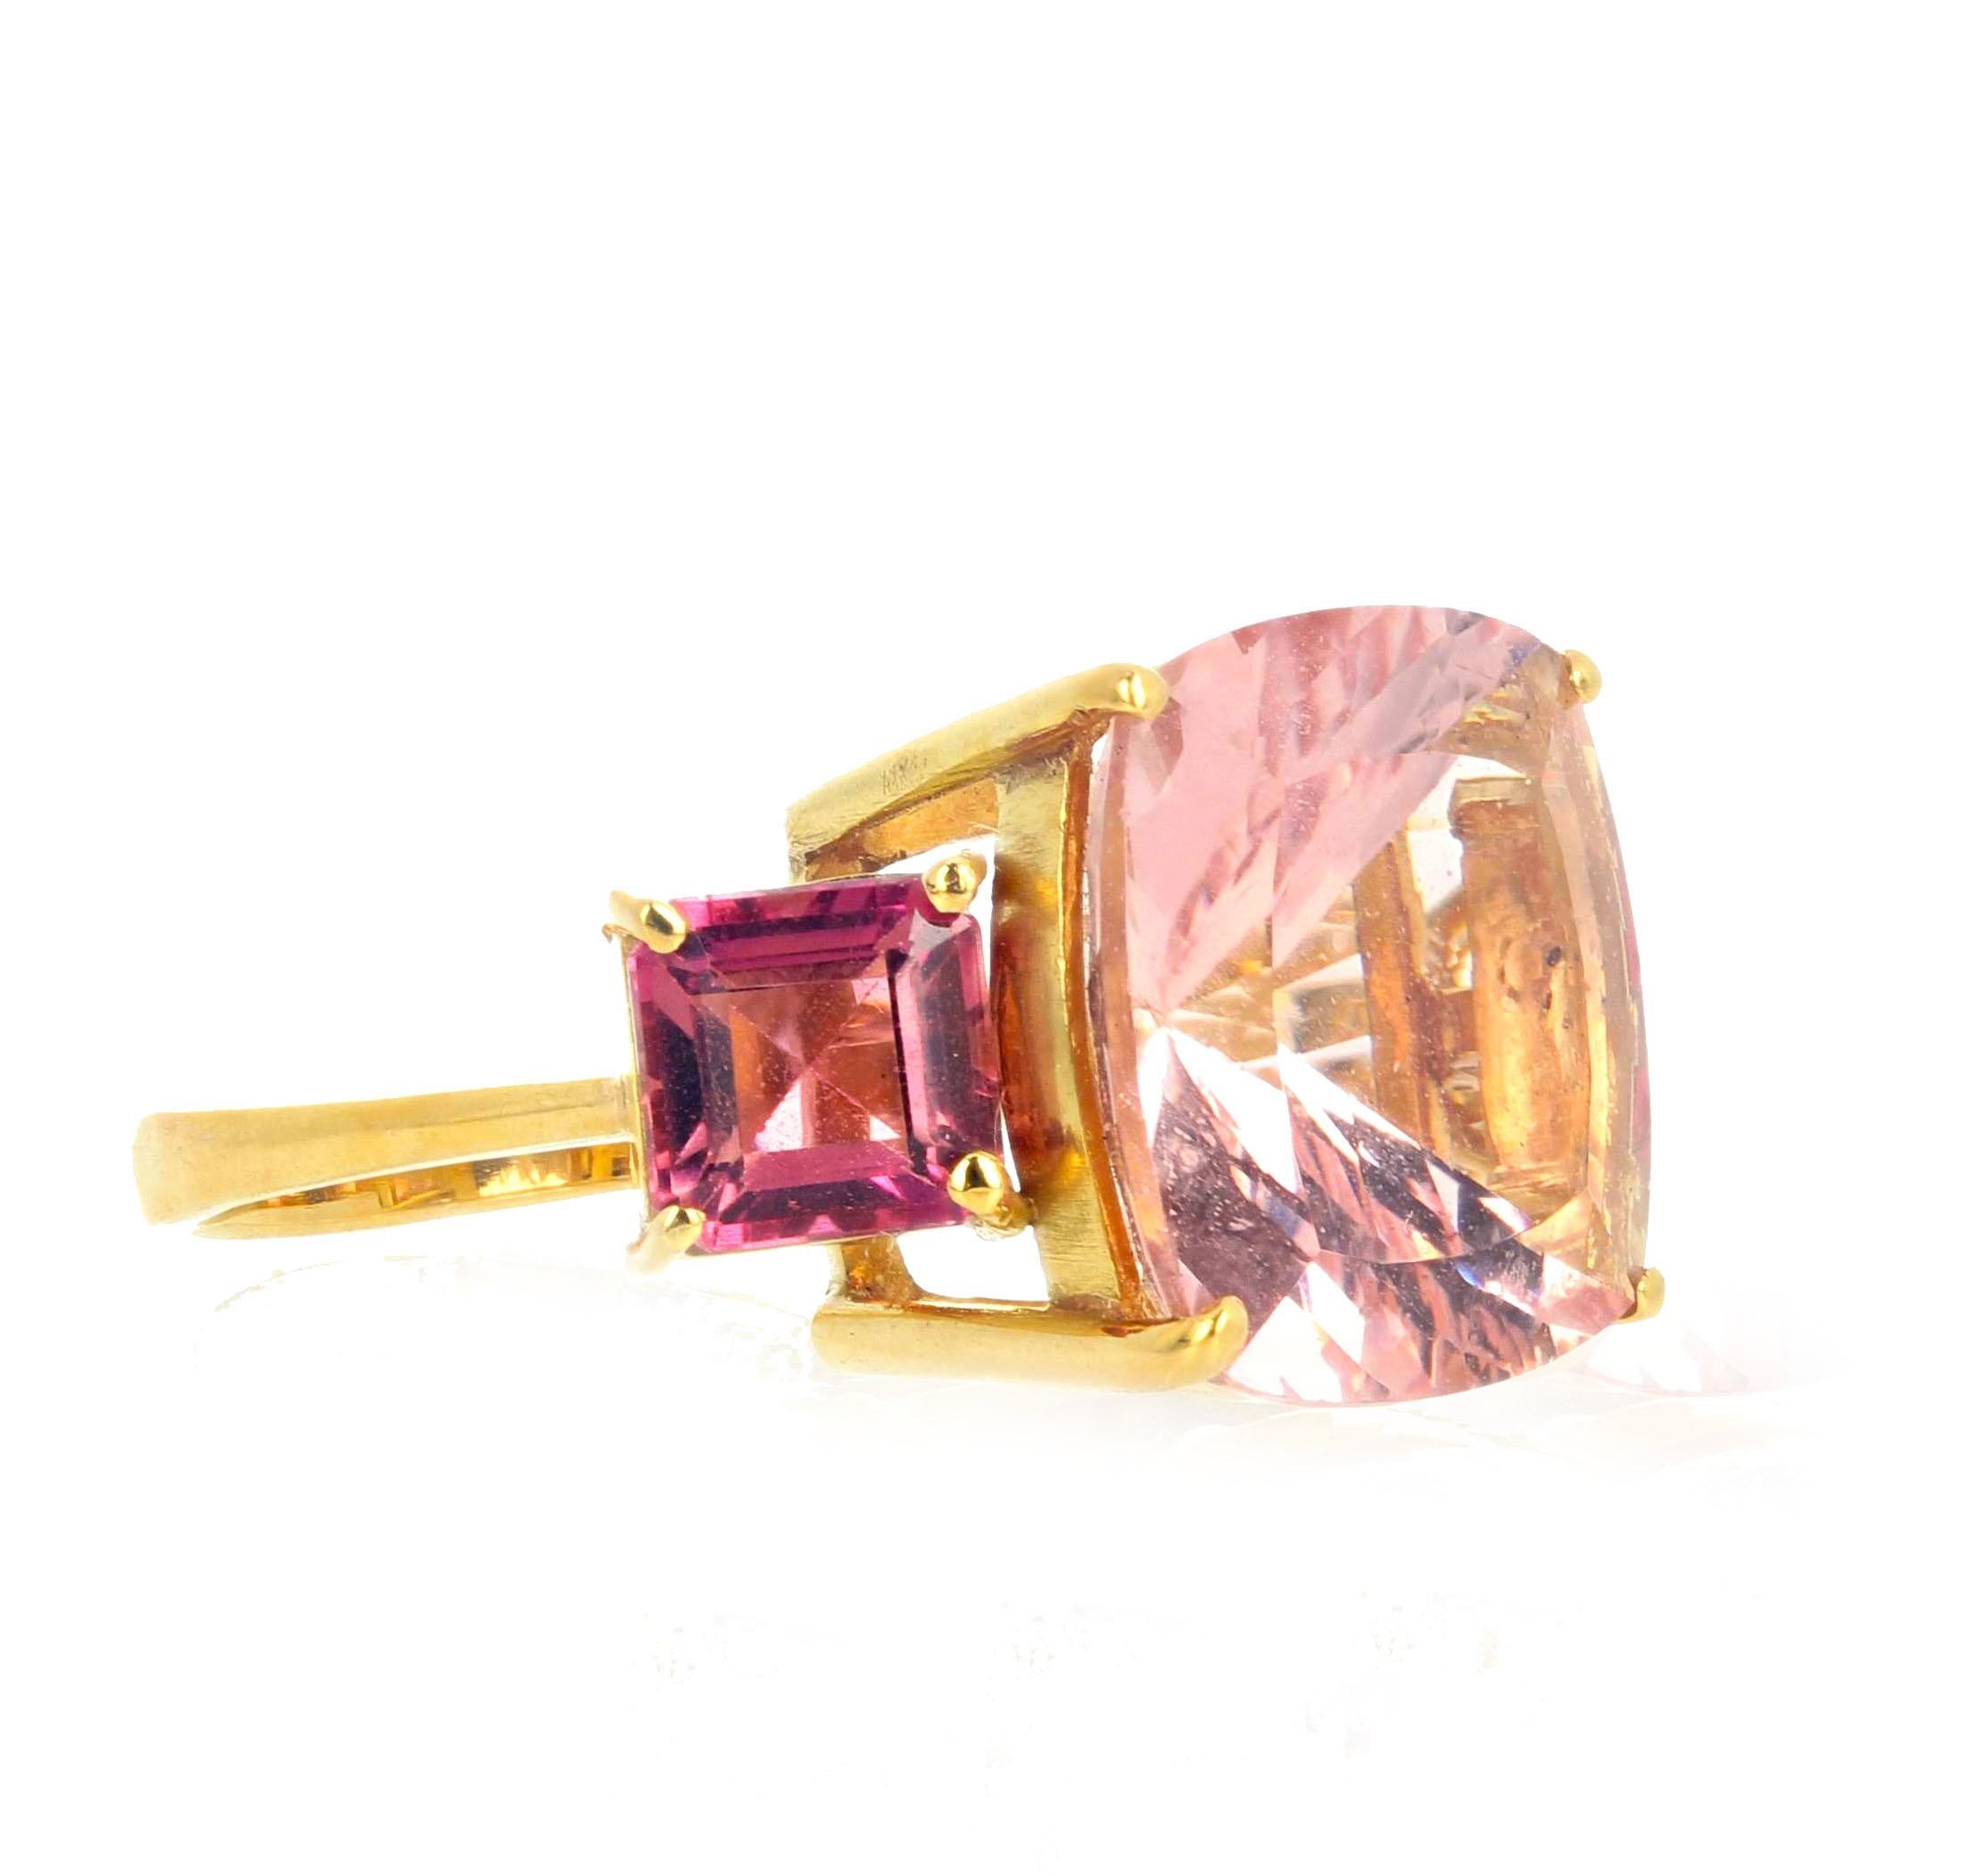 Women's or Men's AJD Absolutely Magnificent 8.89 Ct Blush Morganite & Tourmaline Gold Ring